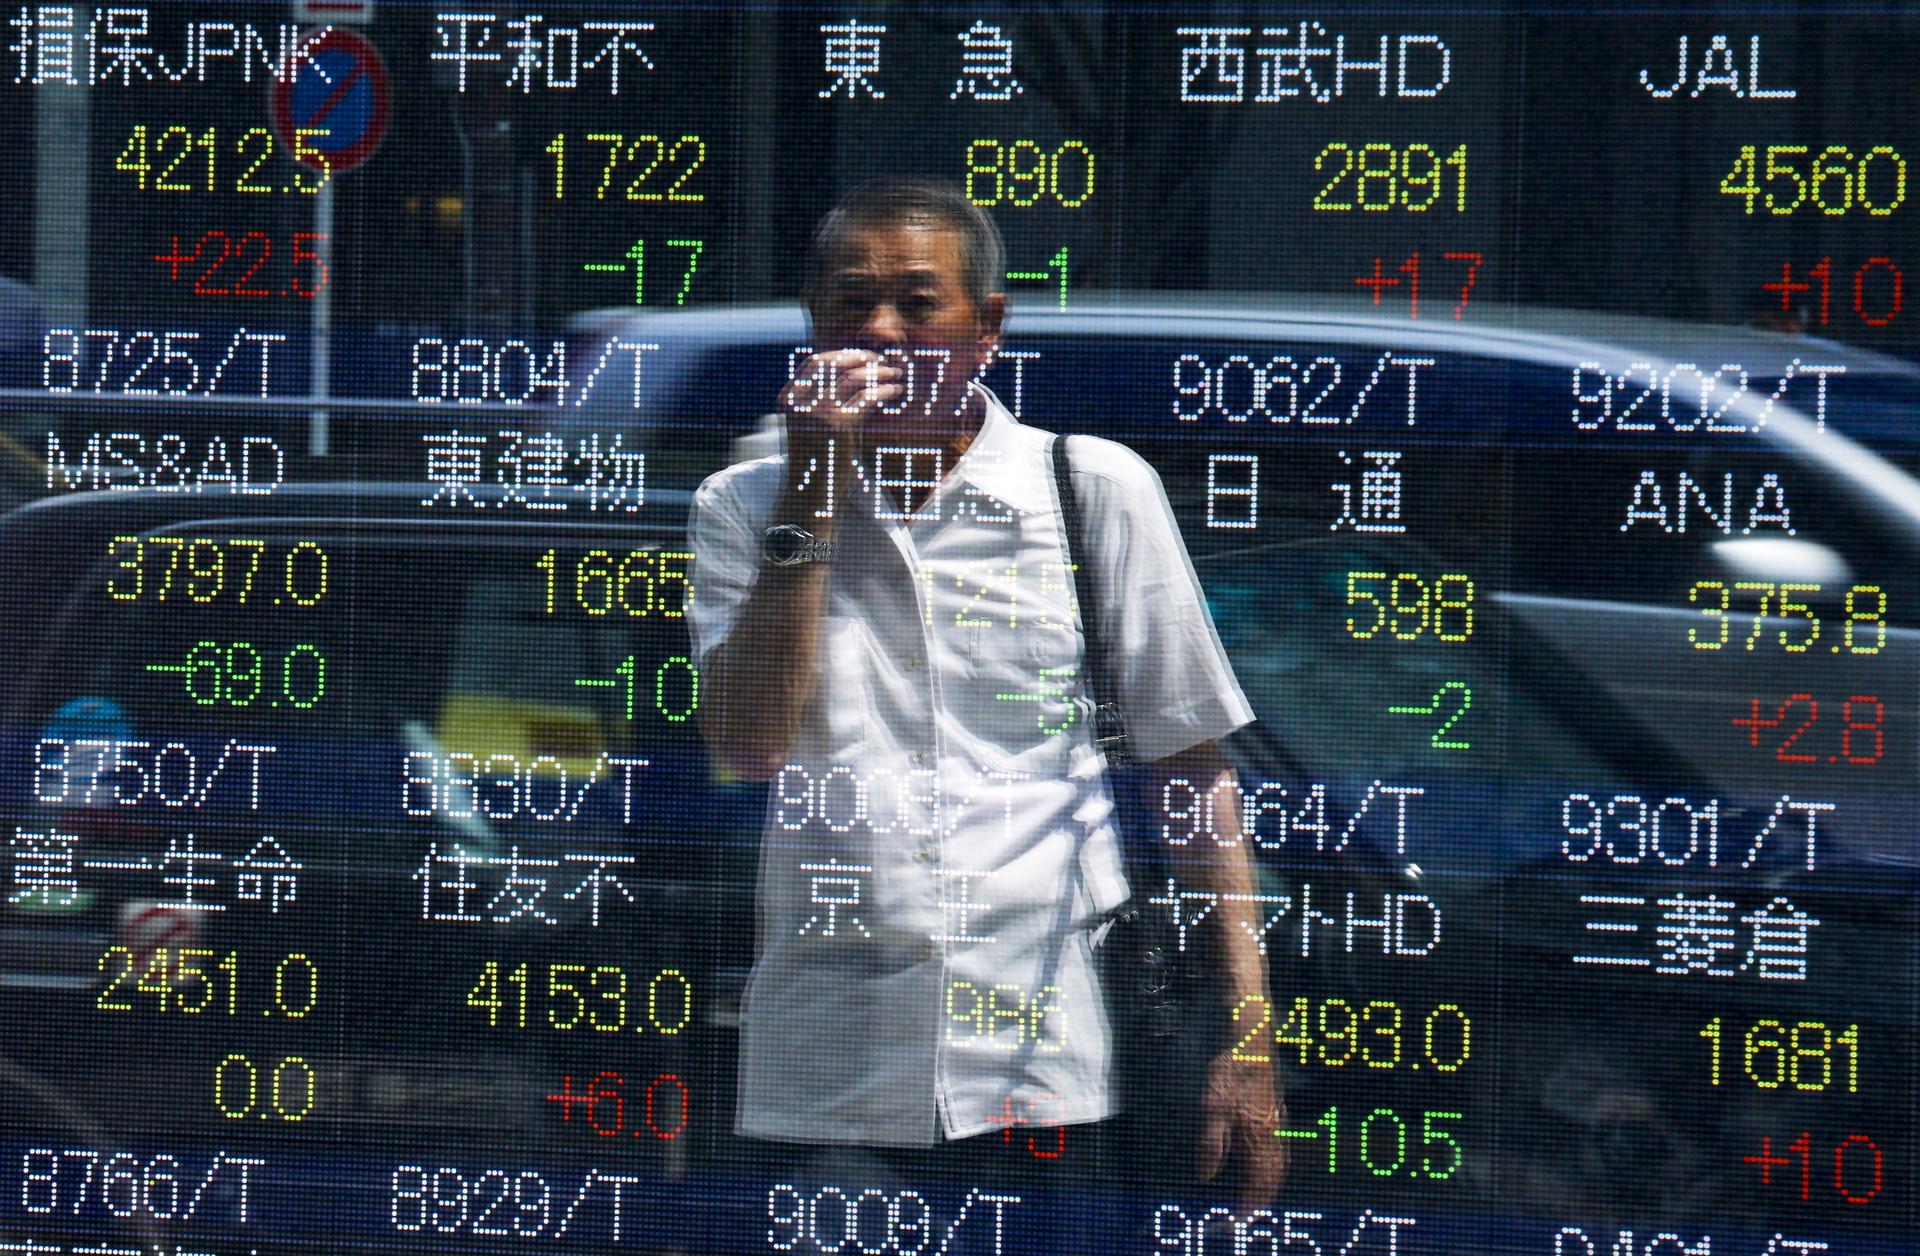 Japan's Nikkei share average dropped Tuesday to a more than two-week low.